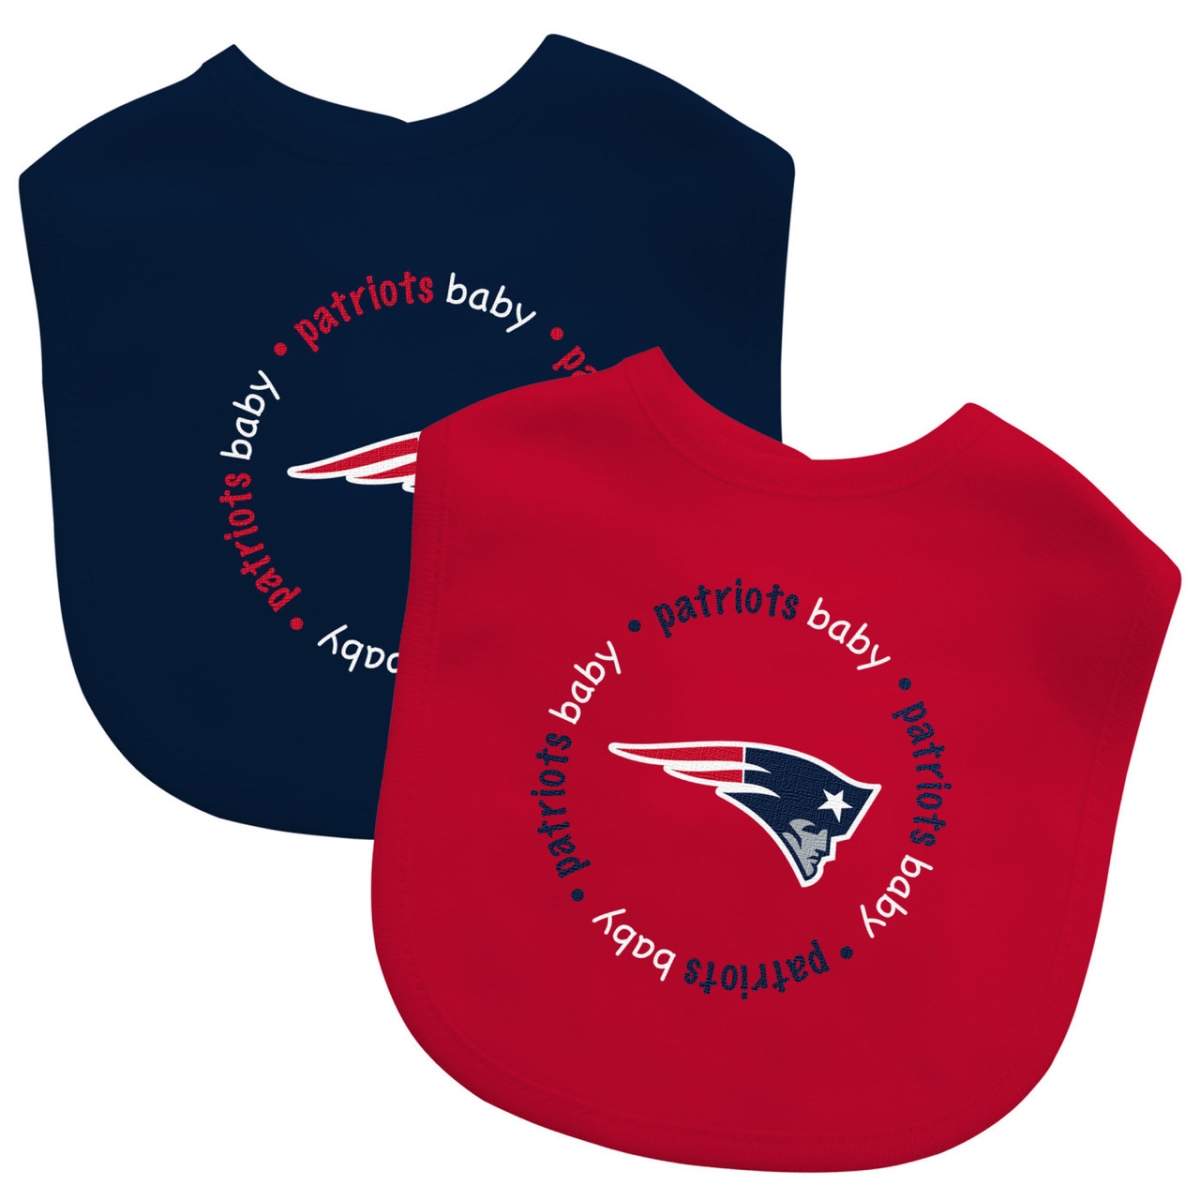 Picture of Masterpiece NEP2160 NFL New England Patriots Baby Bibs - Pack of 2